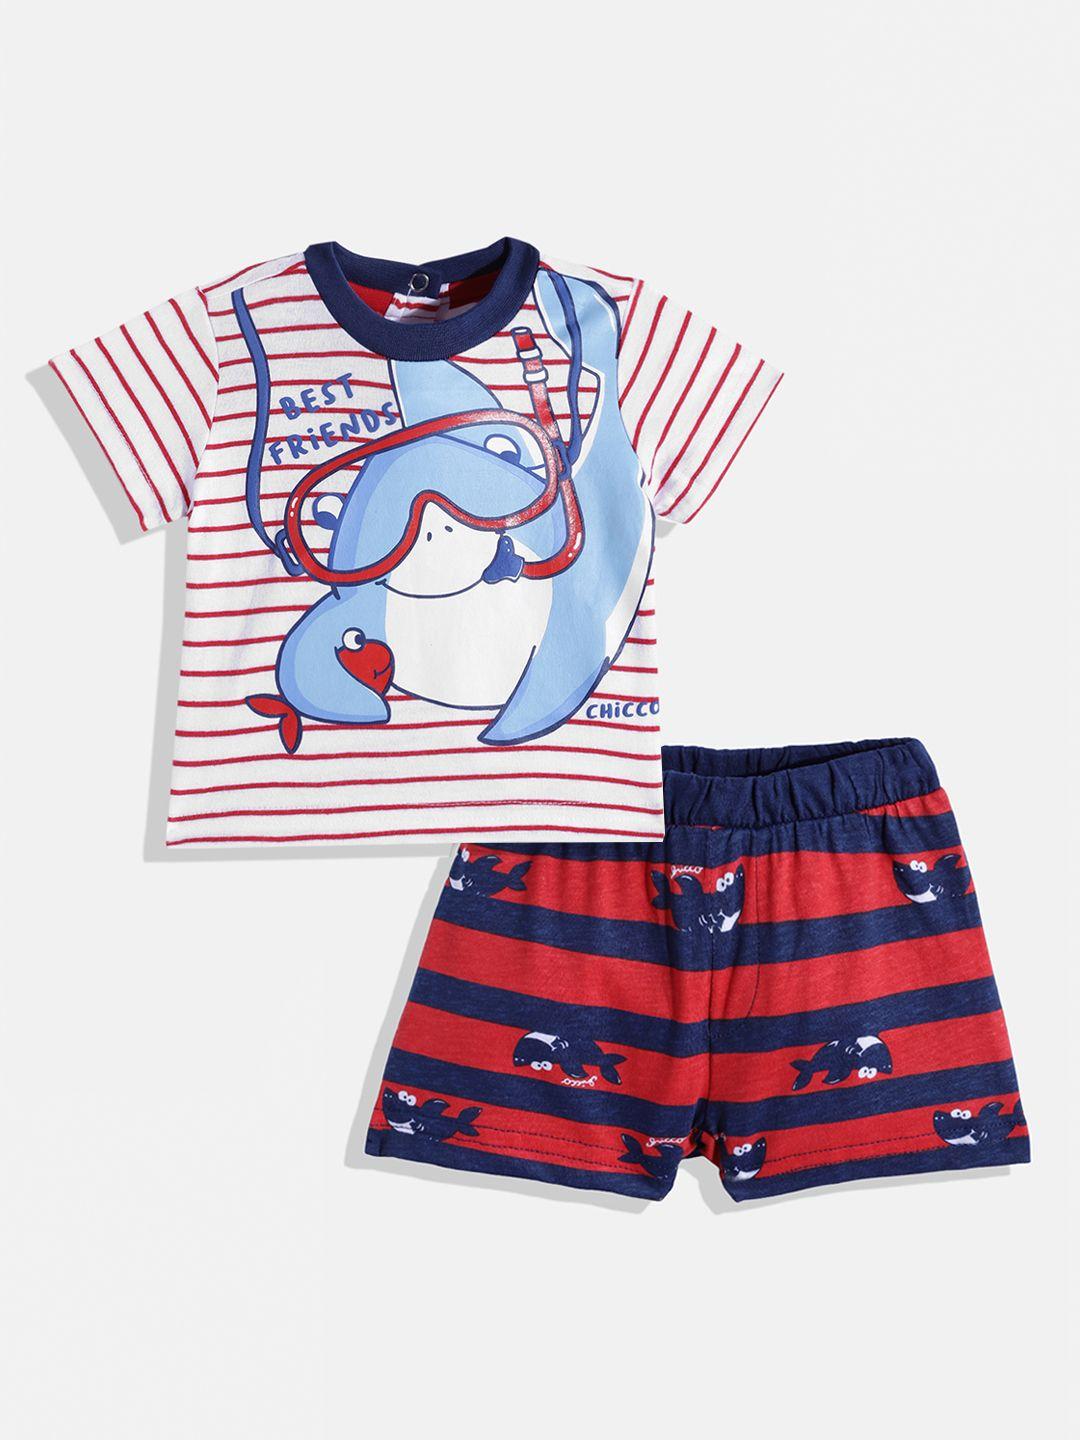 Chicco Infant Boys White & Red Striped & Graphic Print Cotton Clothing Set